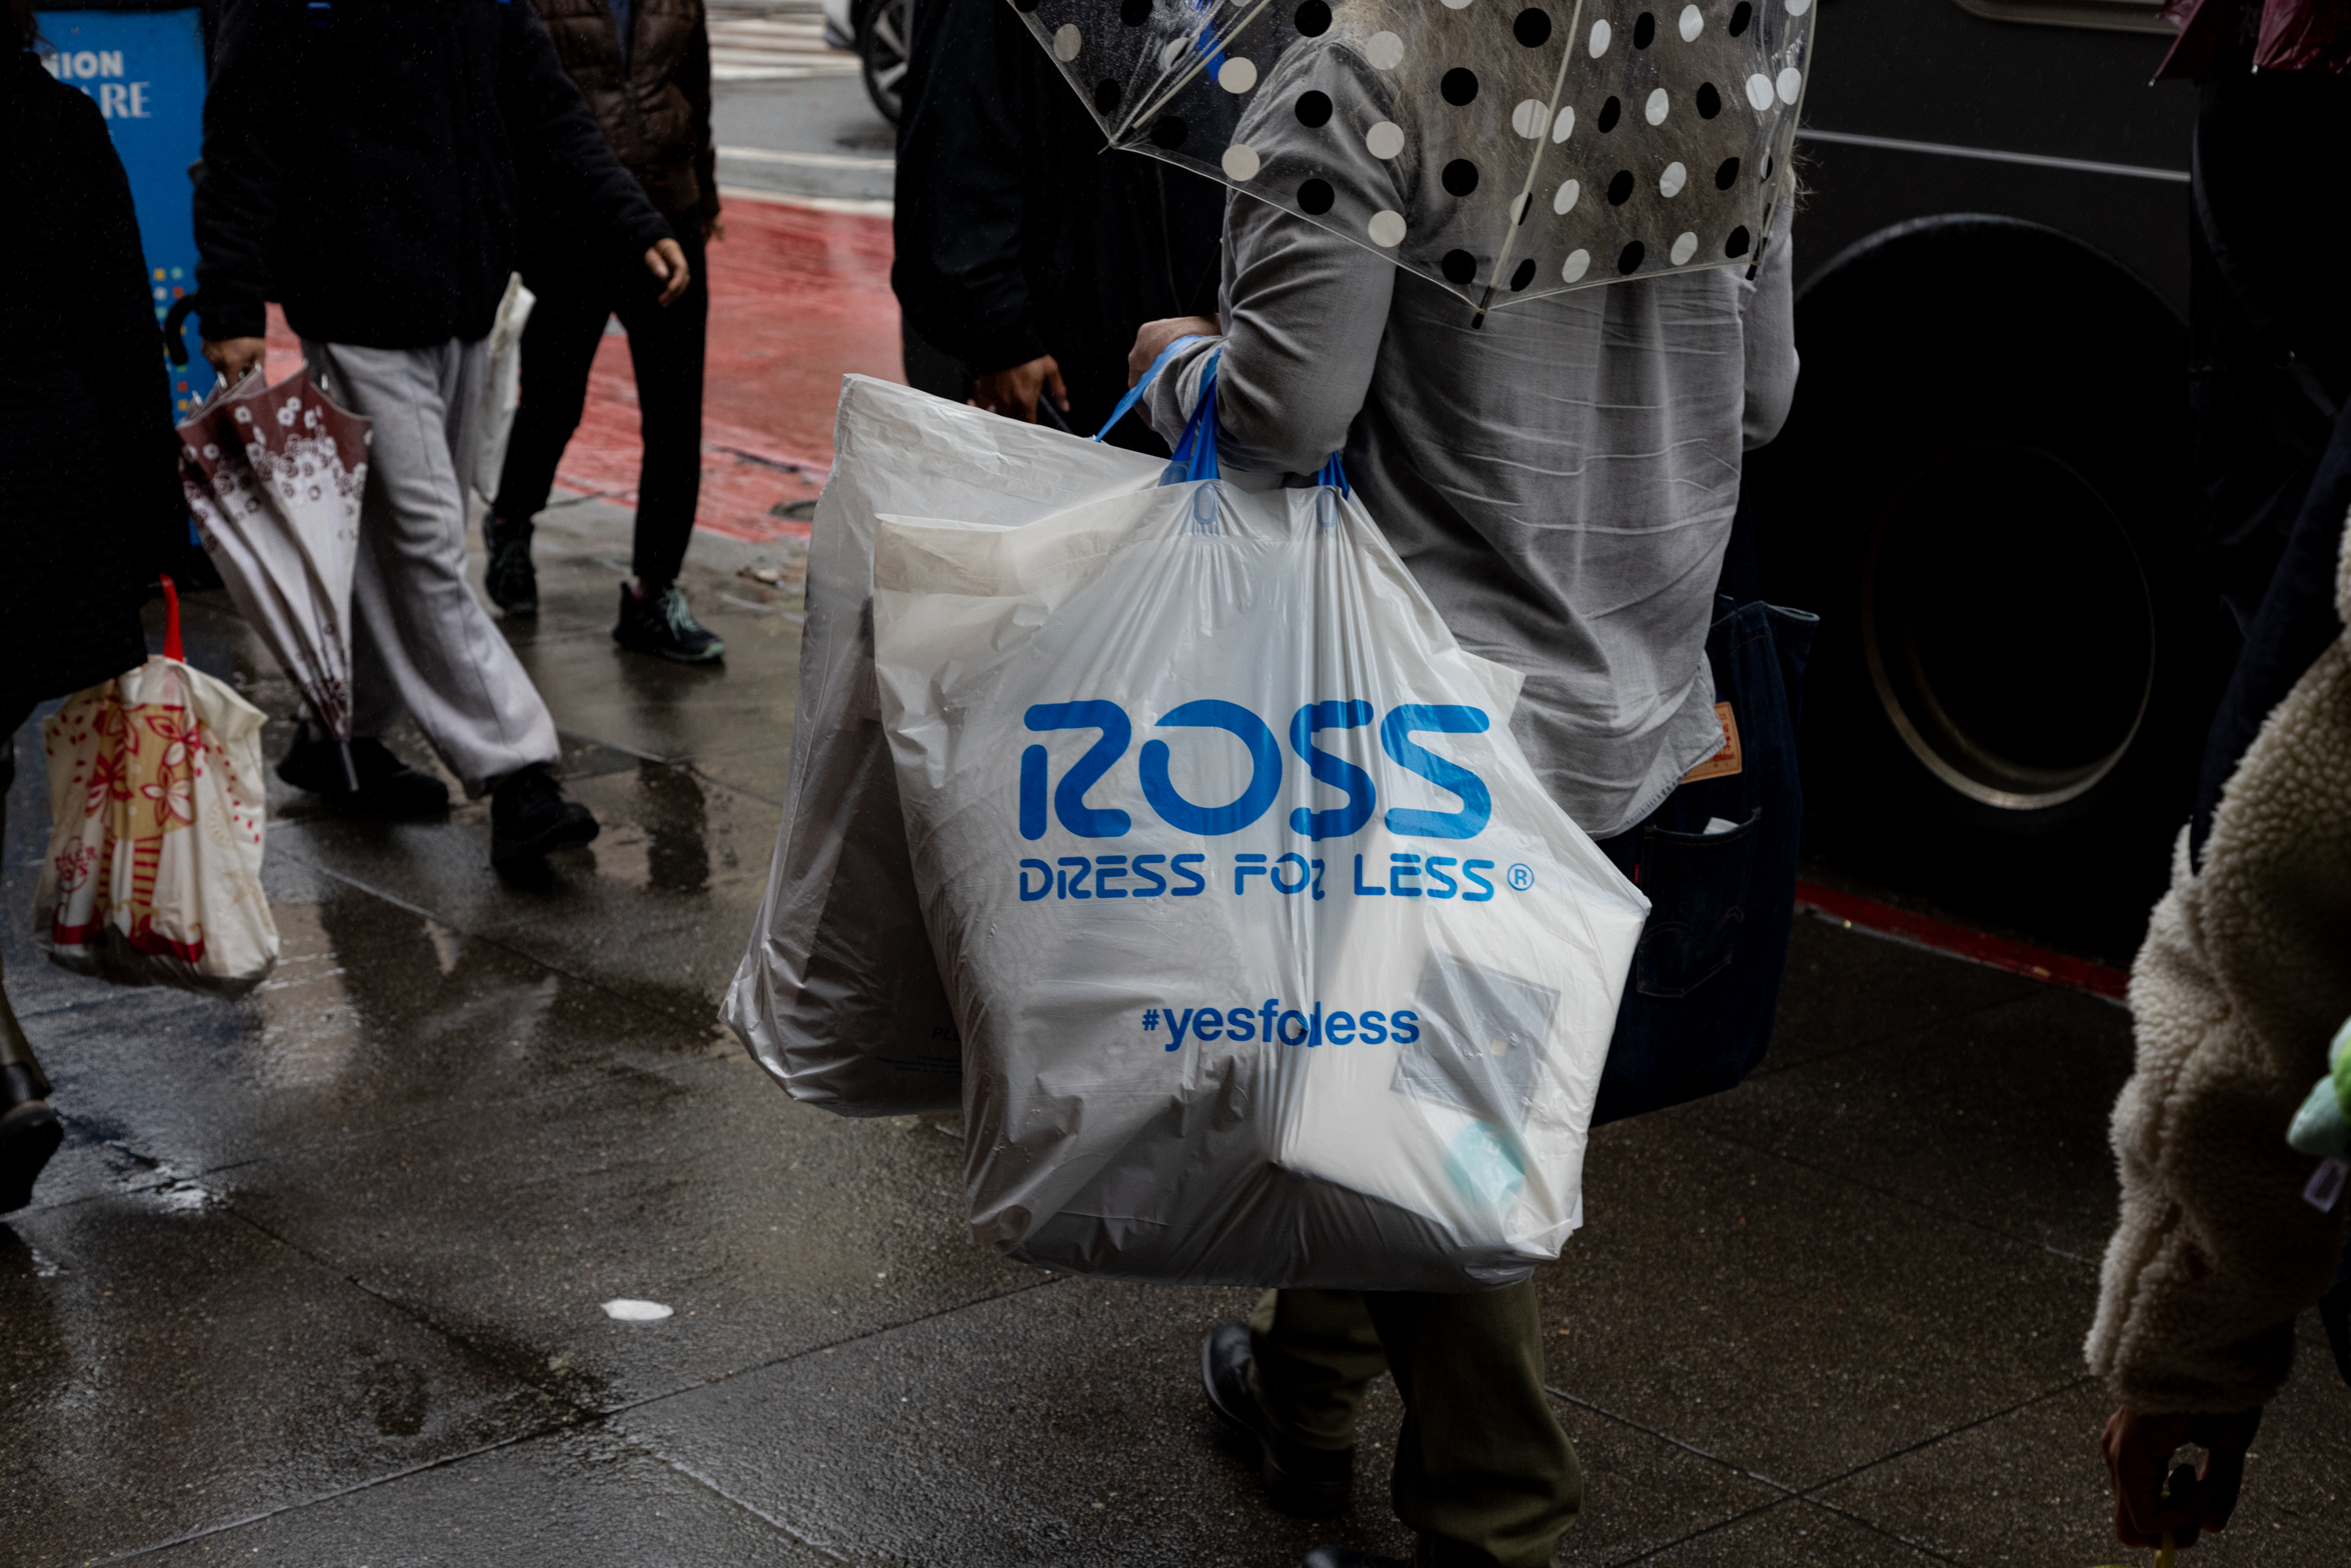 A person carries Ross shopping bags while walking on the sidewalk near Market and Fourth Streets.